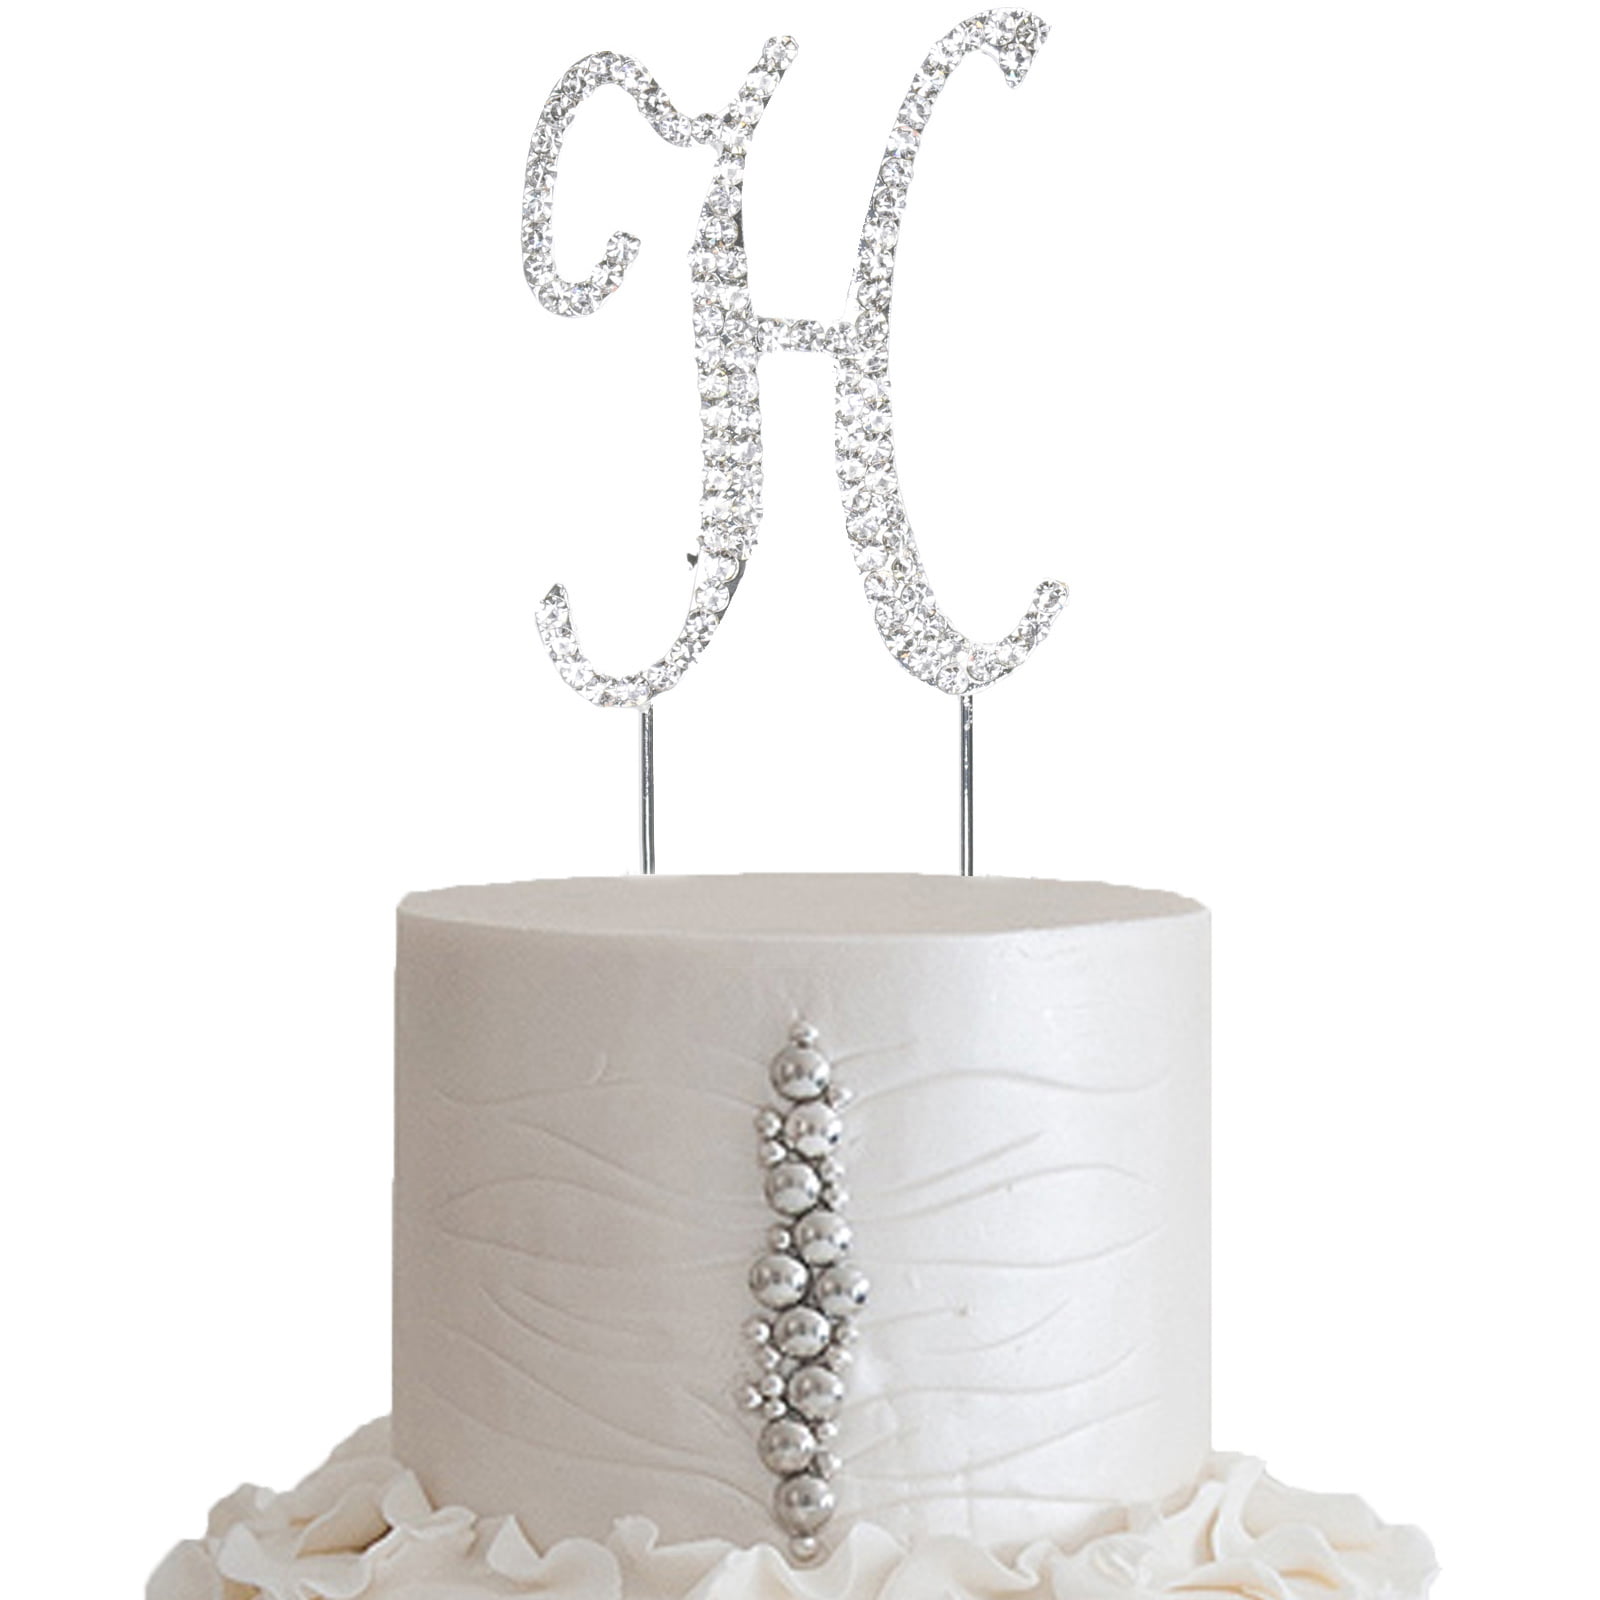 2.5" SILVER Letter А Rhinestone Cake Topper Wedding Cupcake Dessert Events Party 